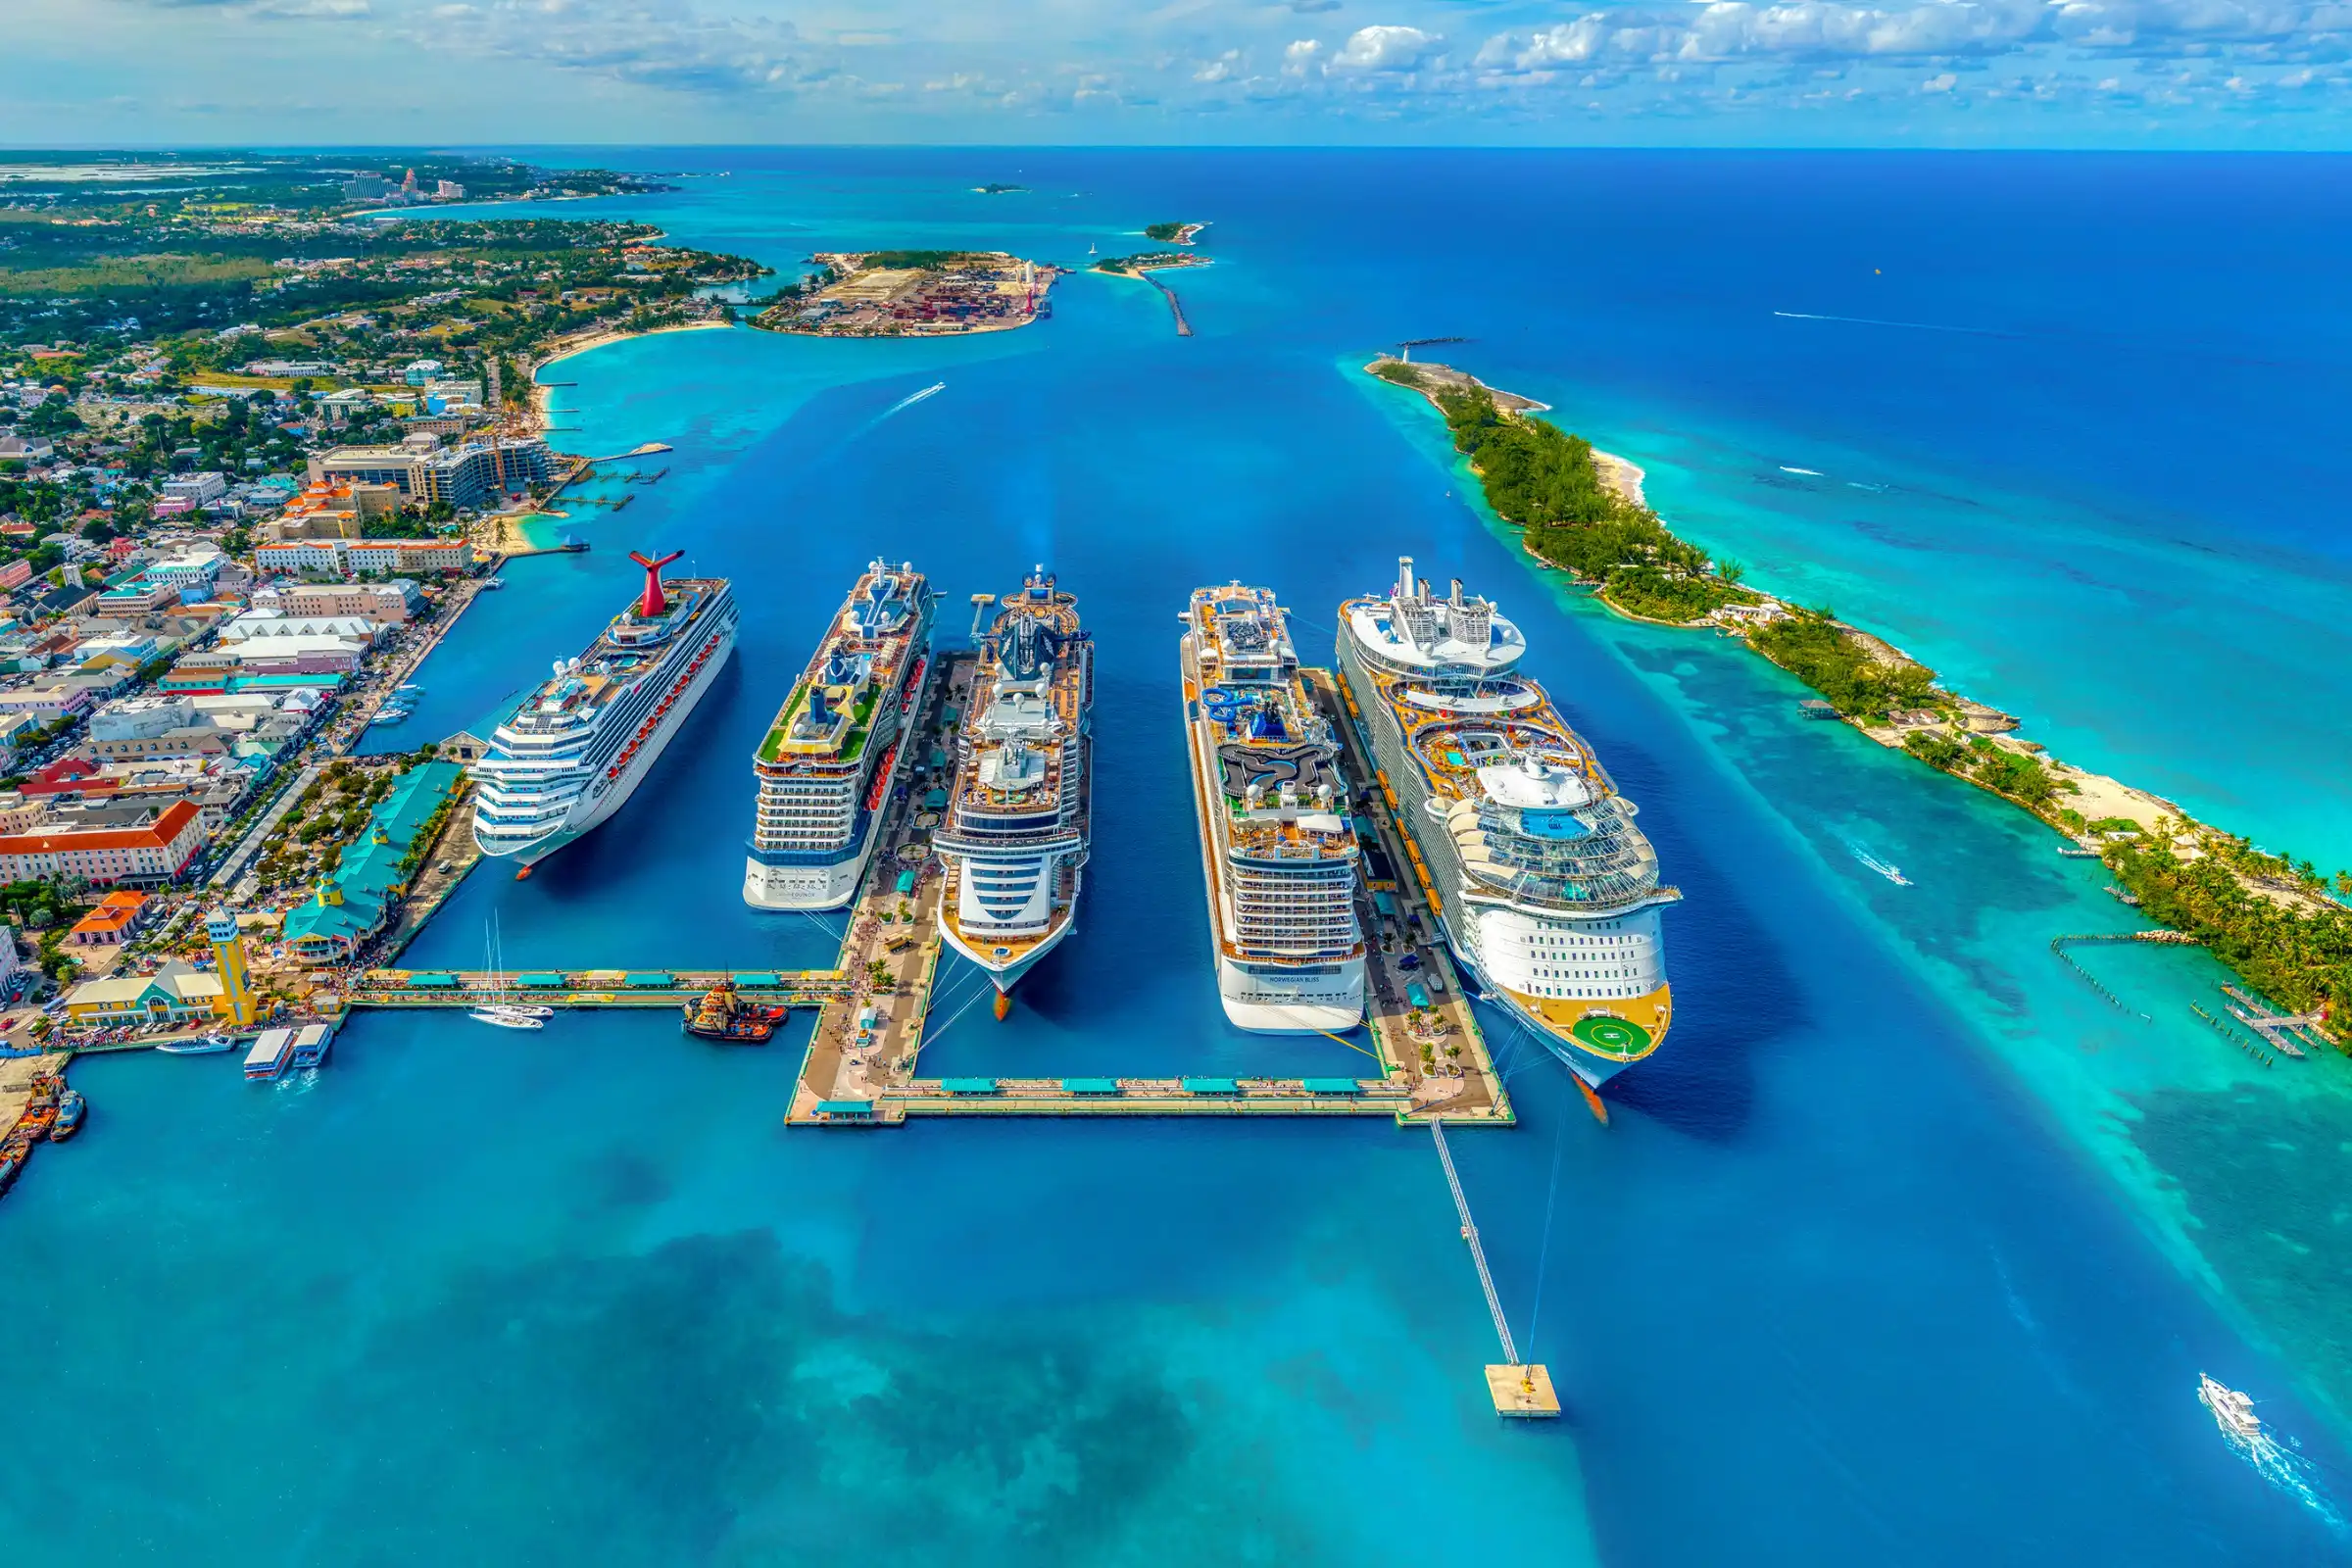 a photo of five cruise ships docked in port